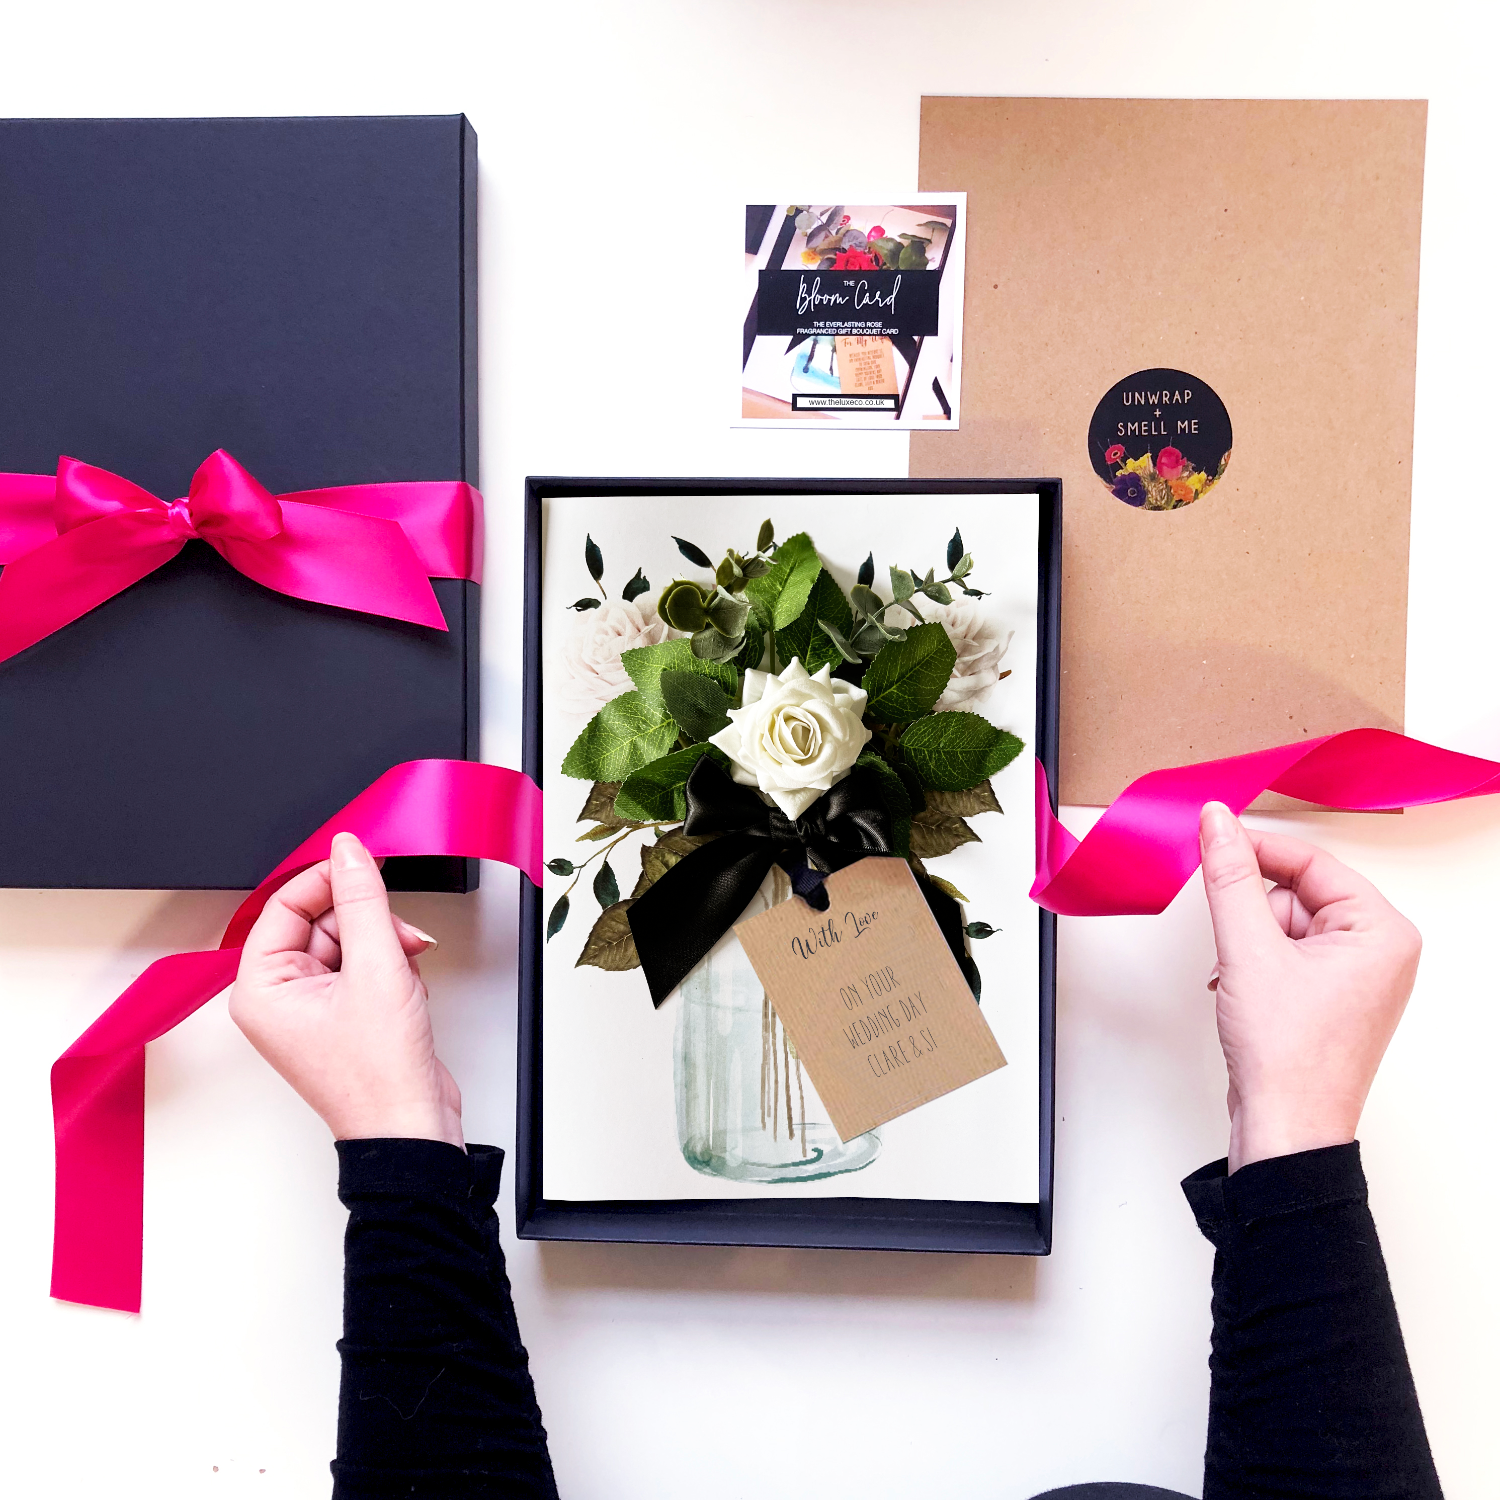 Luxury personalised scented rose wedding card in box that smells of rose petals | The Luxe Co